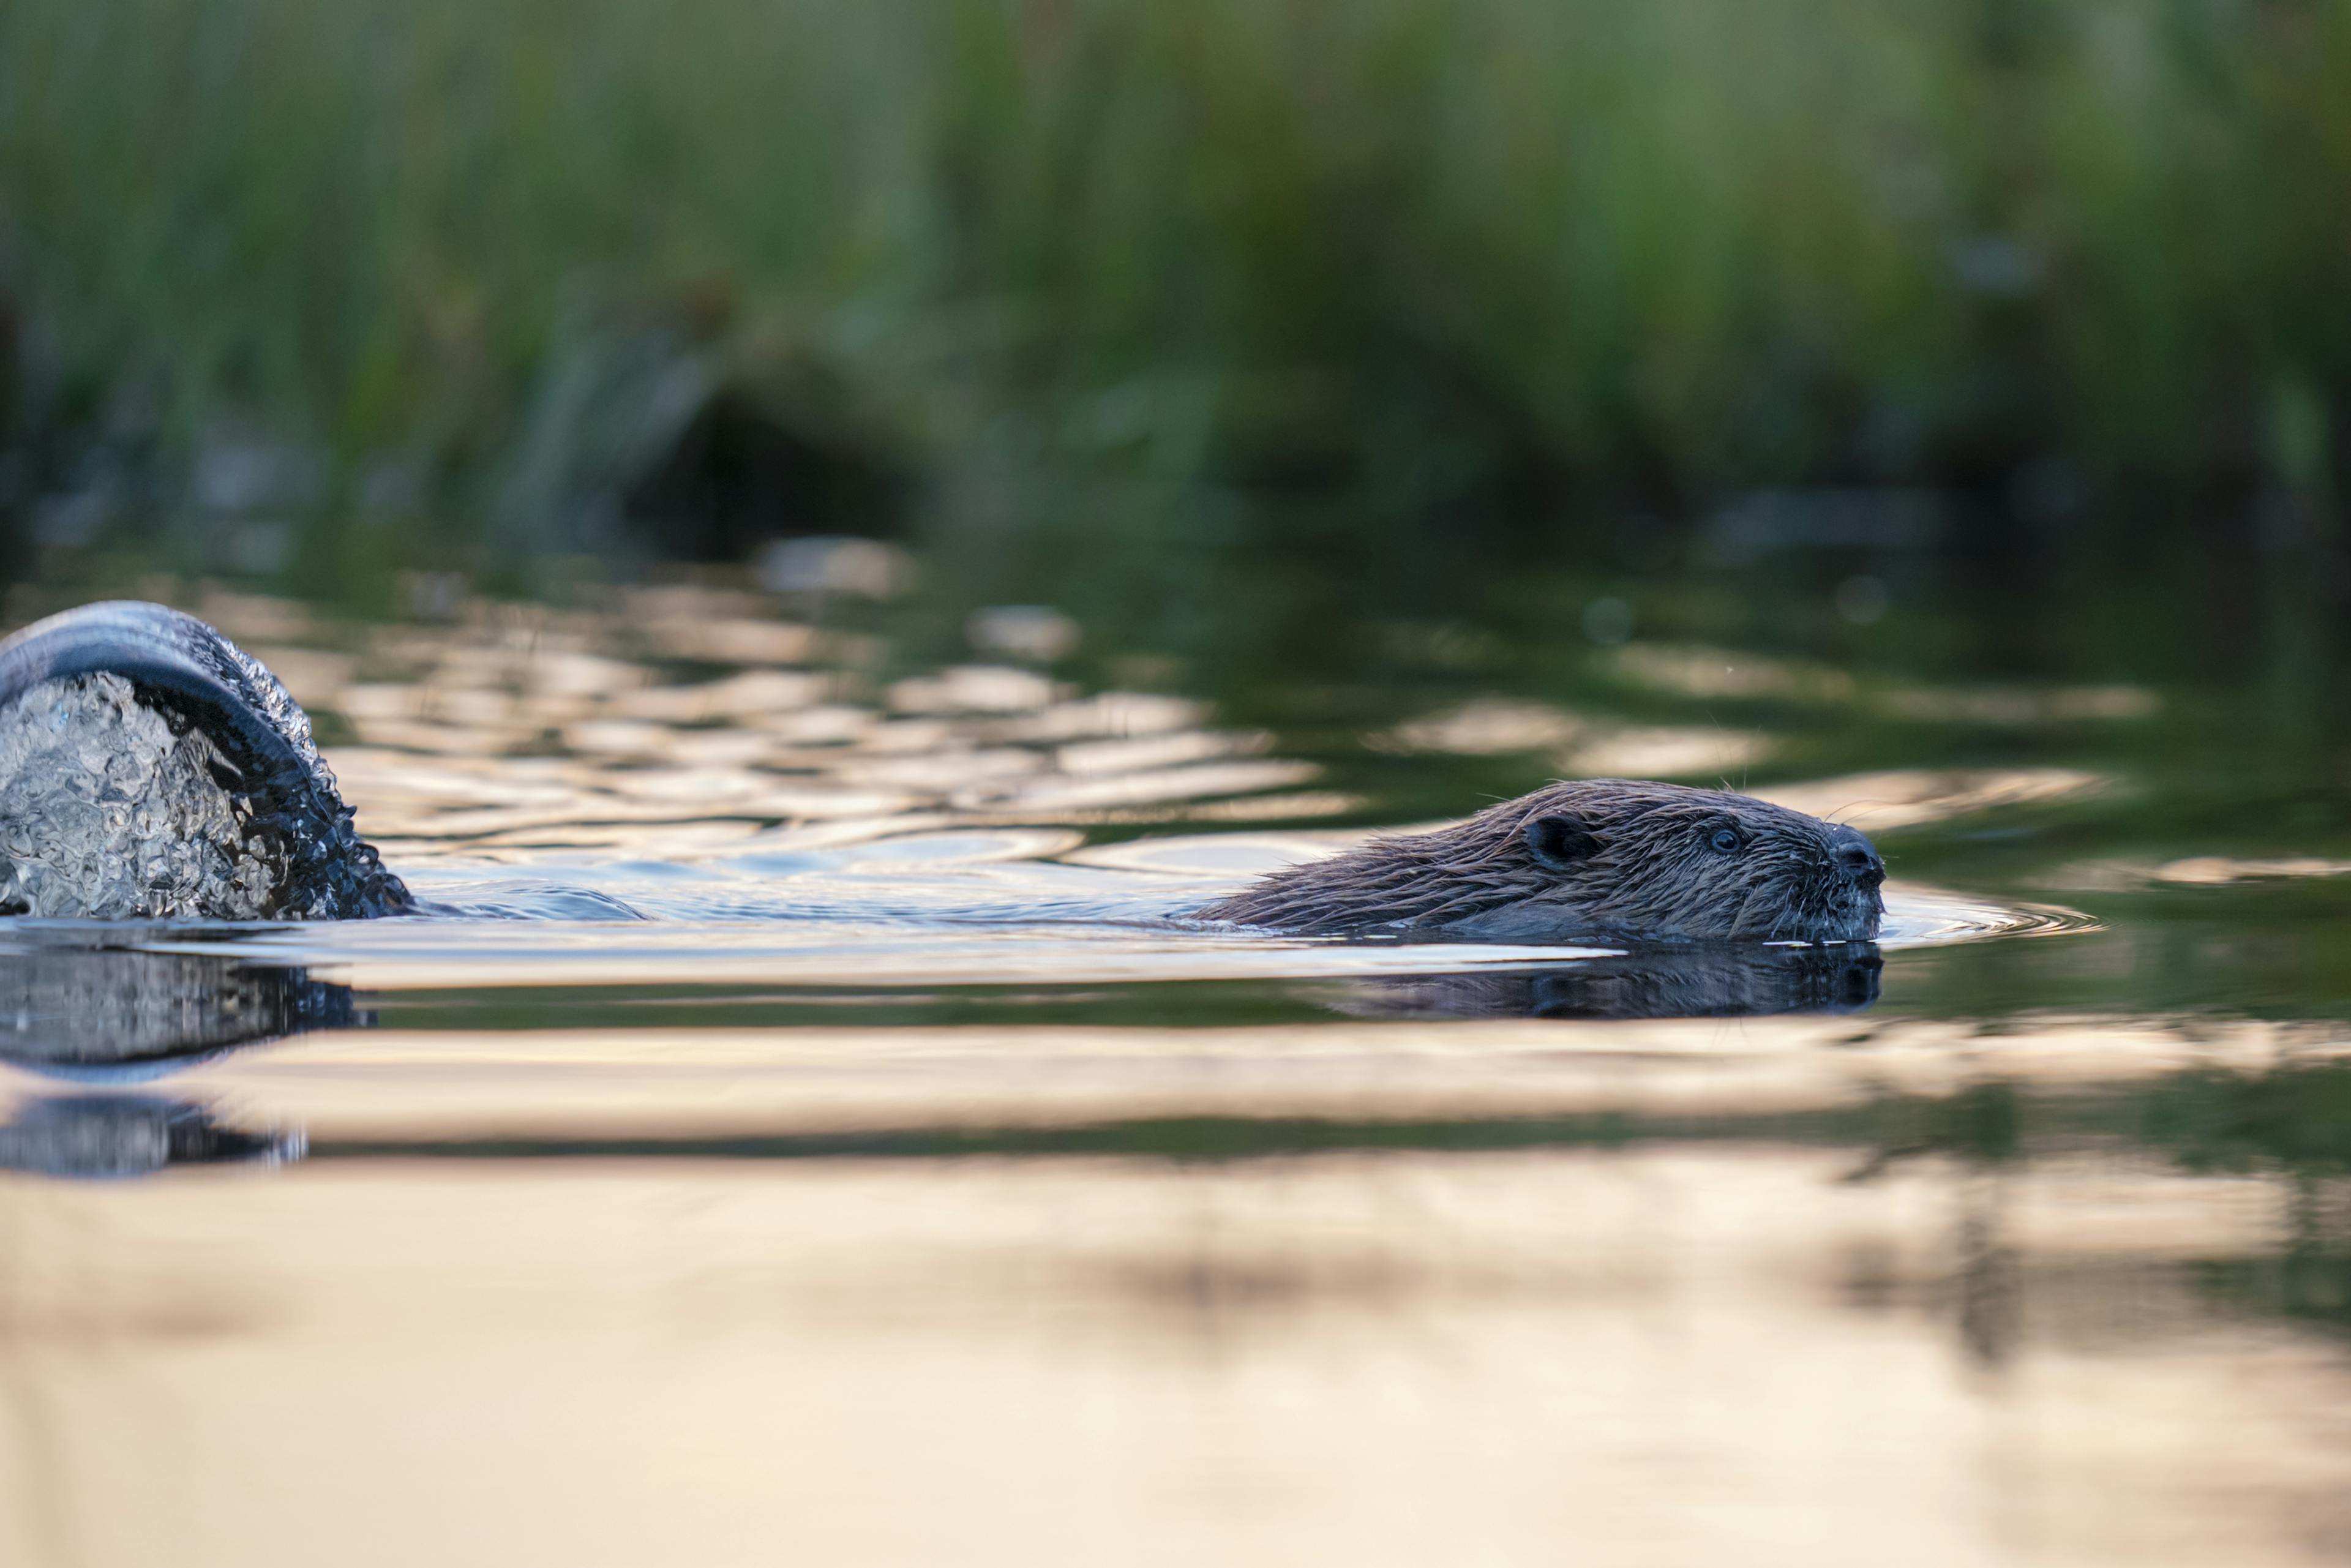 Beaver swimming close to participants just about to smack its tail into the water. Seen at a beaver safari in Sweden by Nordic Discovery.